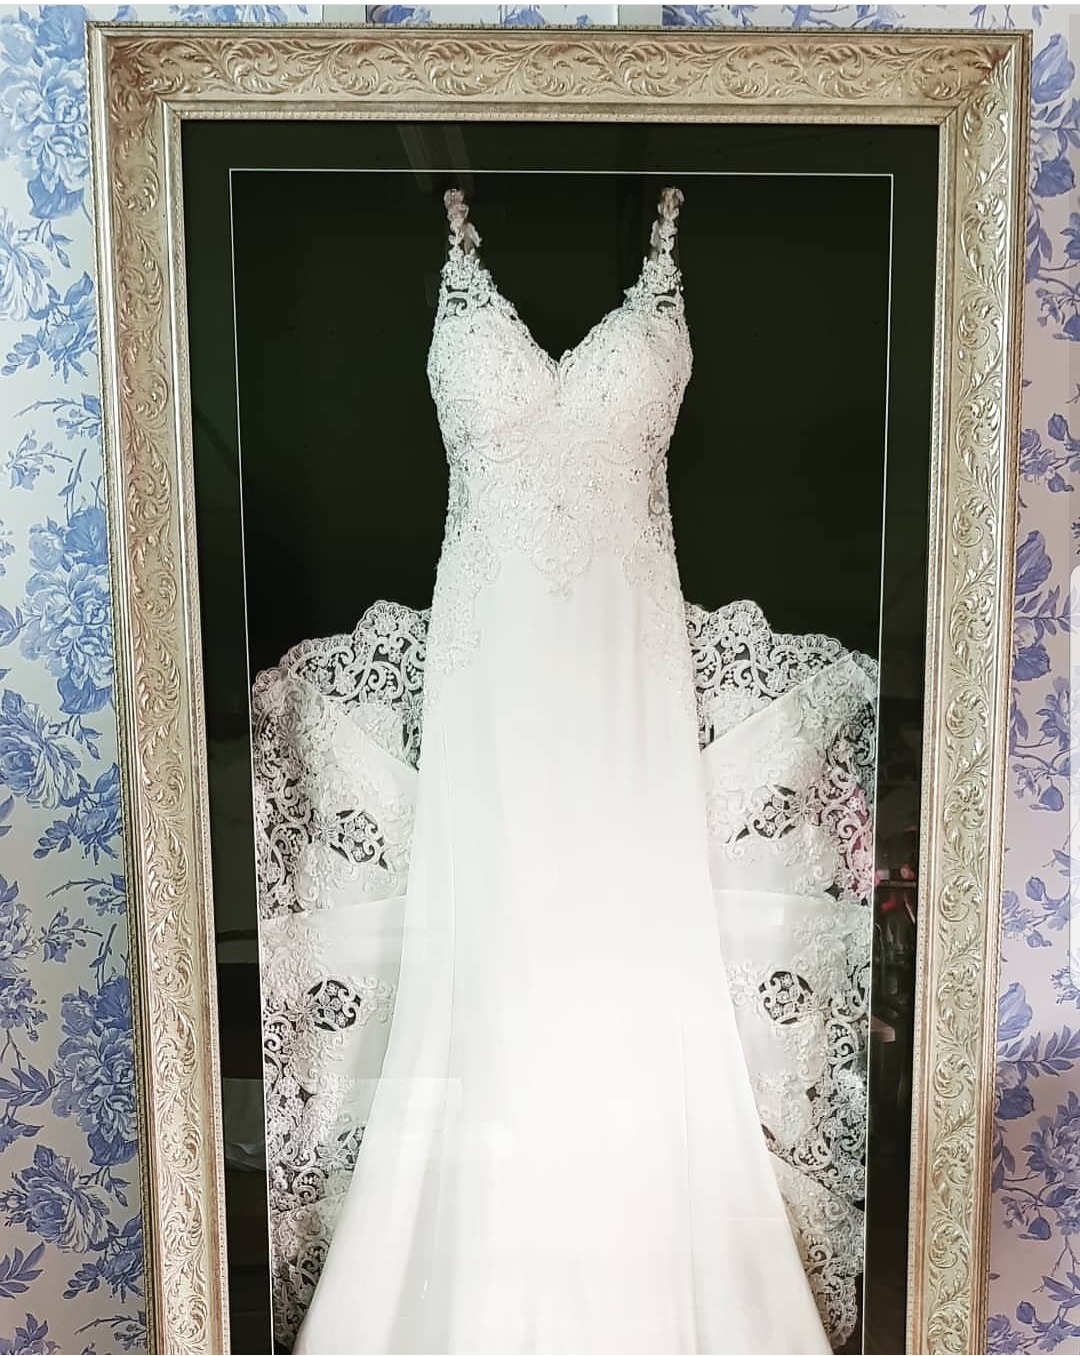 WEDDING DRESS CLEANING AND PRESERVATION | LOUISVILLE, KY |REBECCA'S